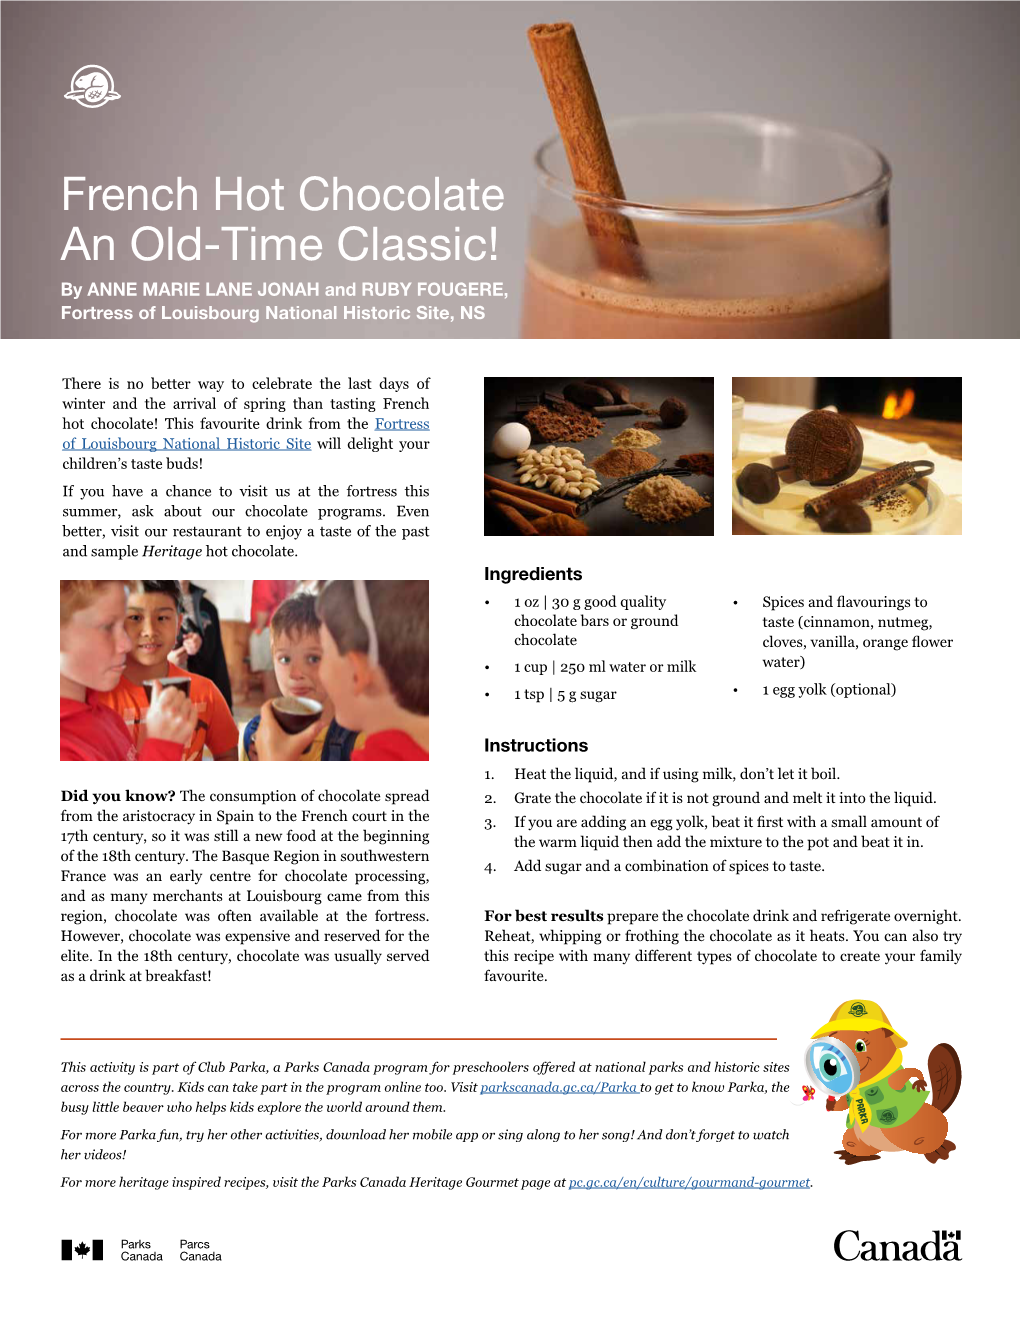 French Hot Chocolate: an Old-Time Classic!